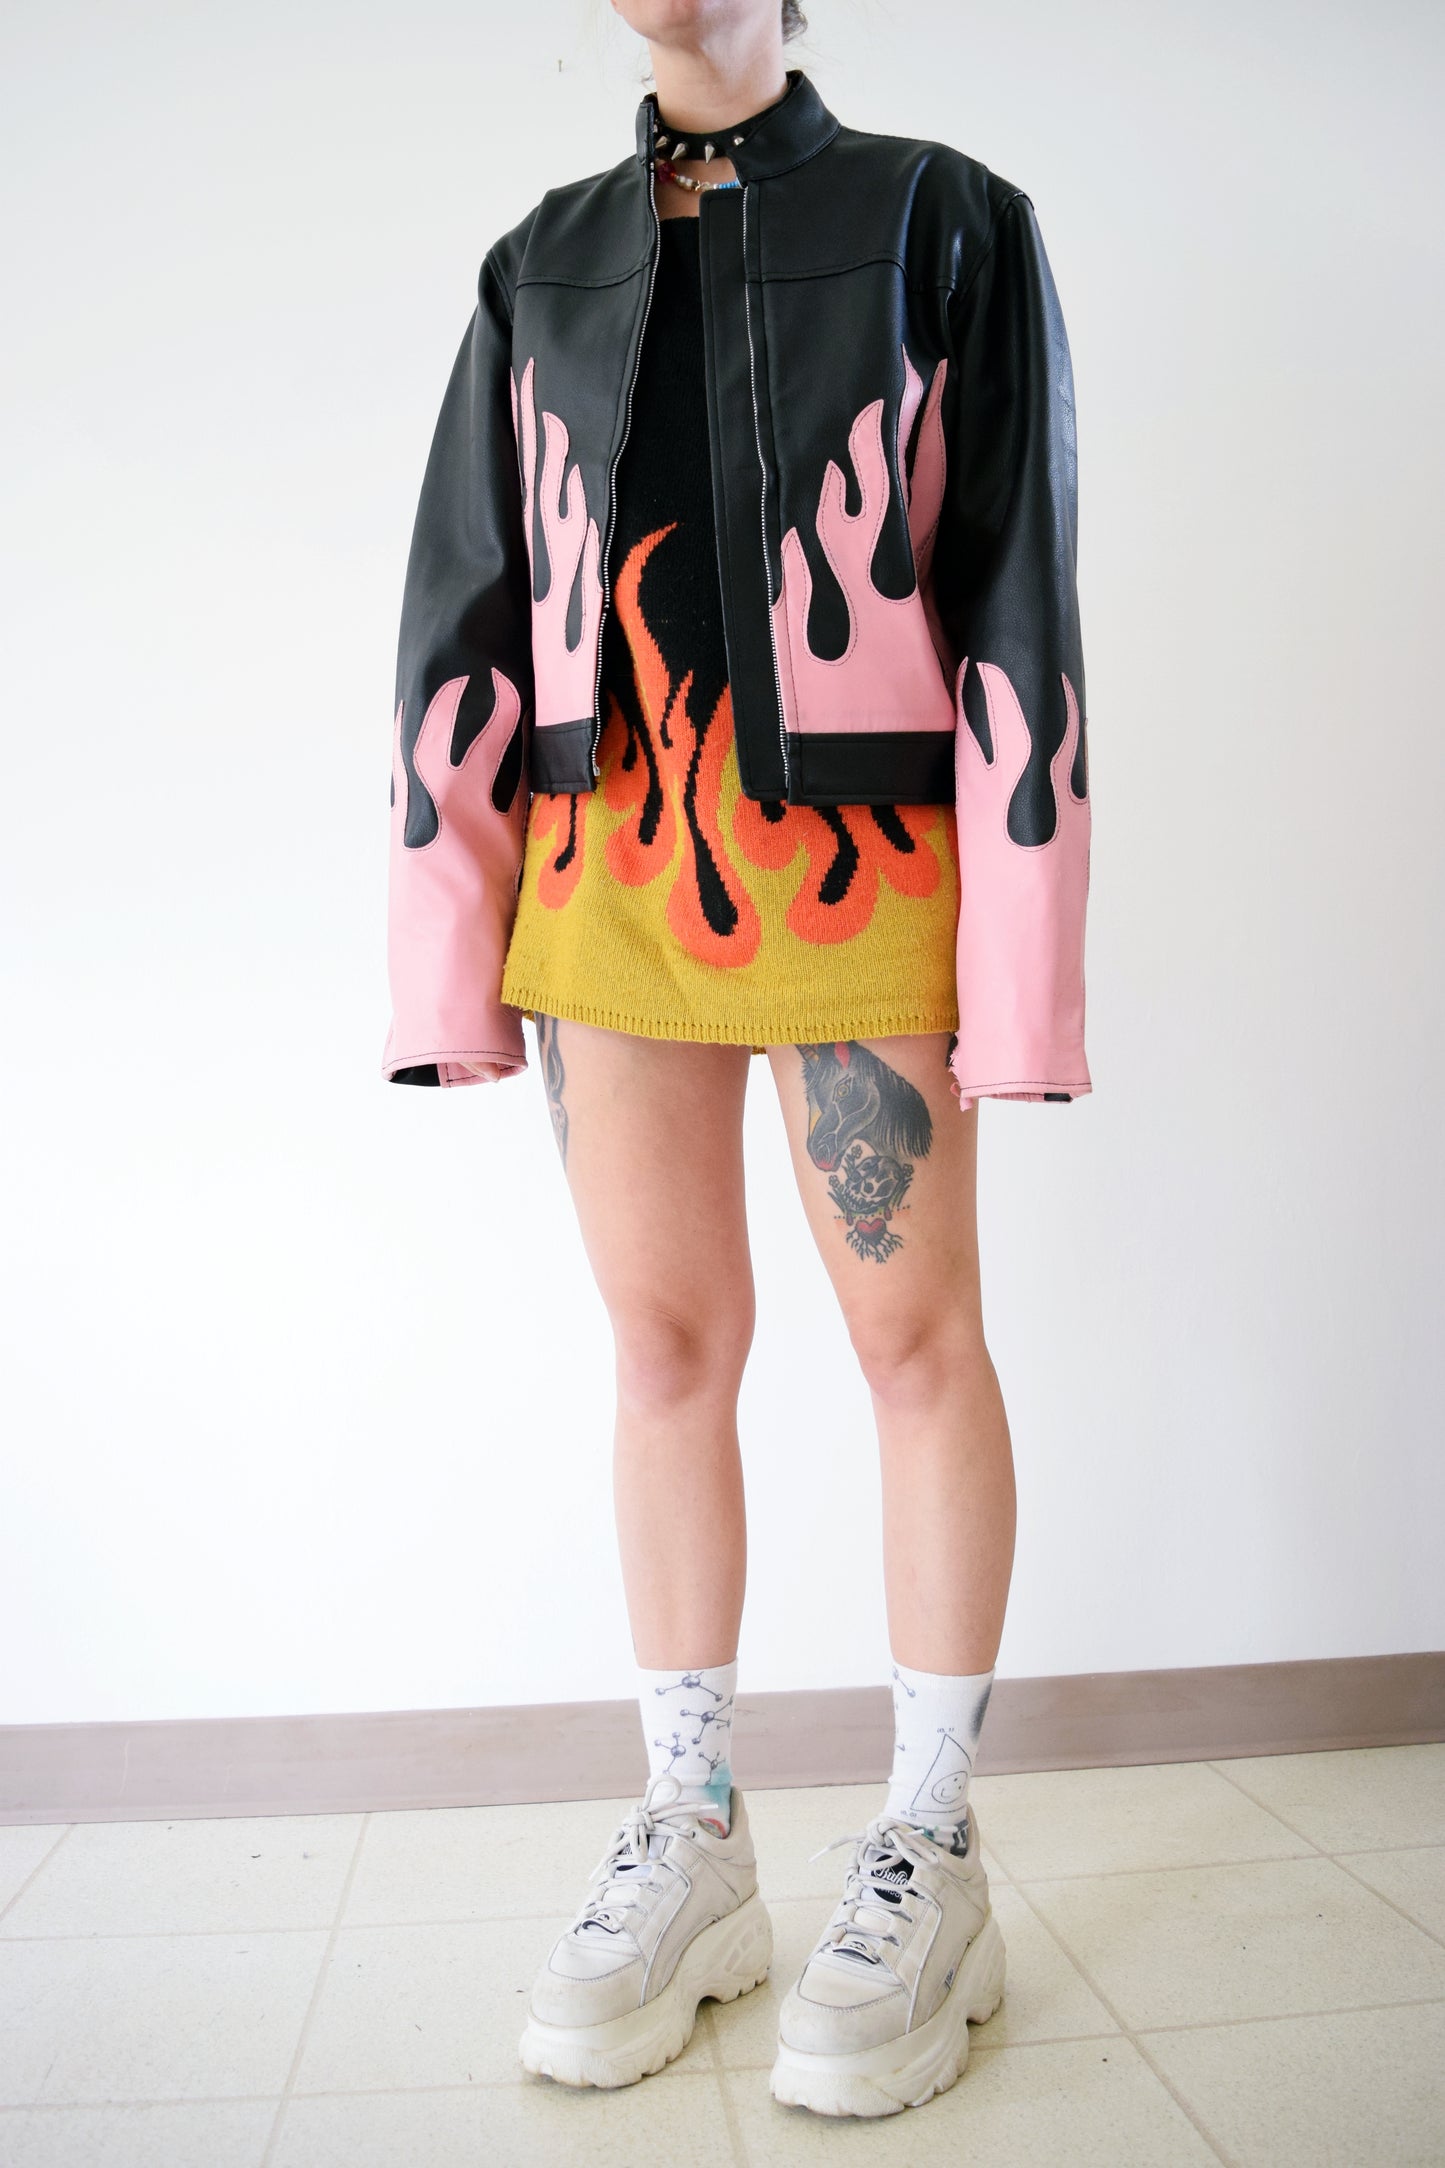 PINK FLAME PLEATHER JACKET - S/M